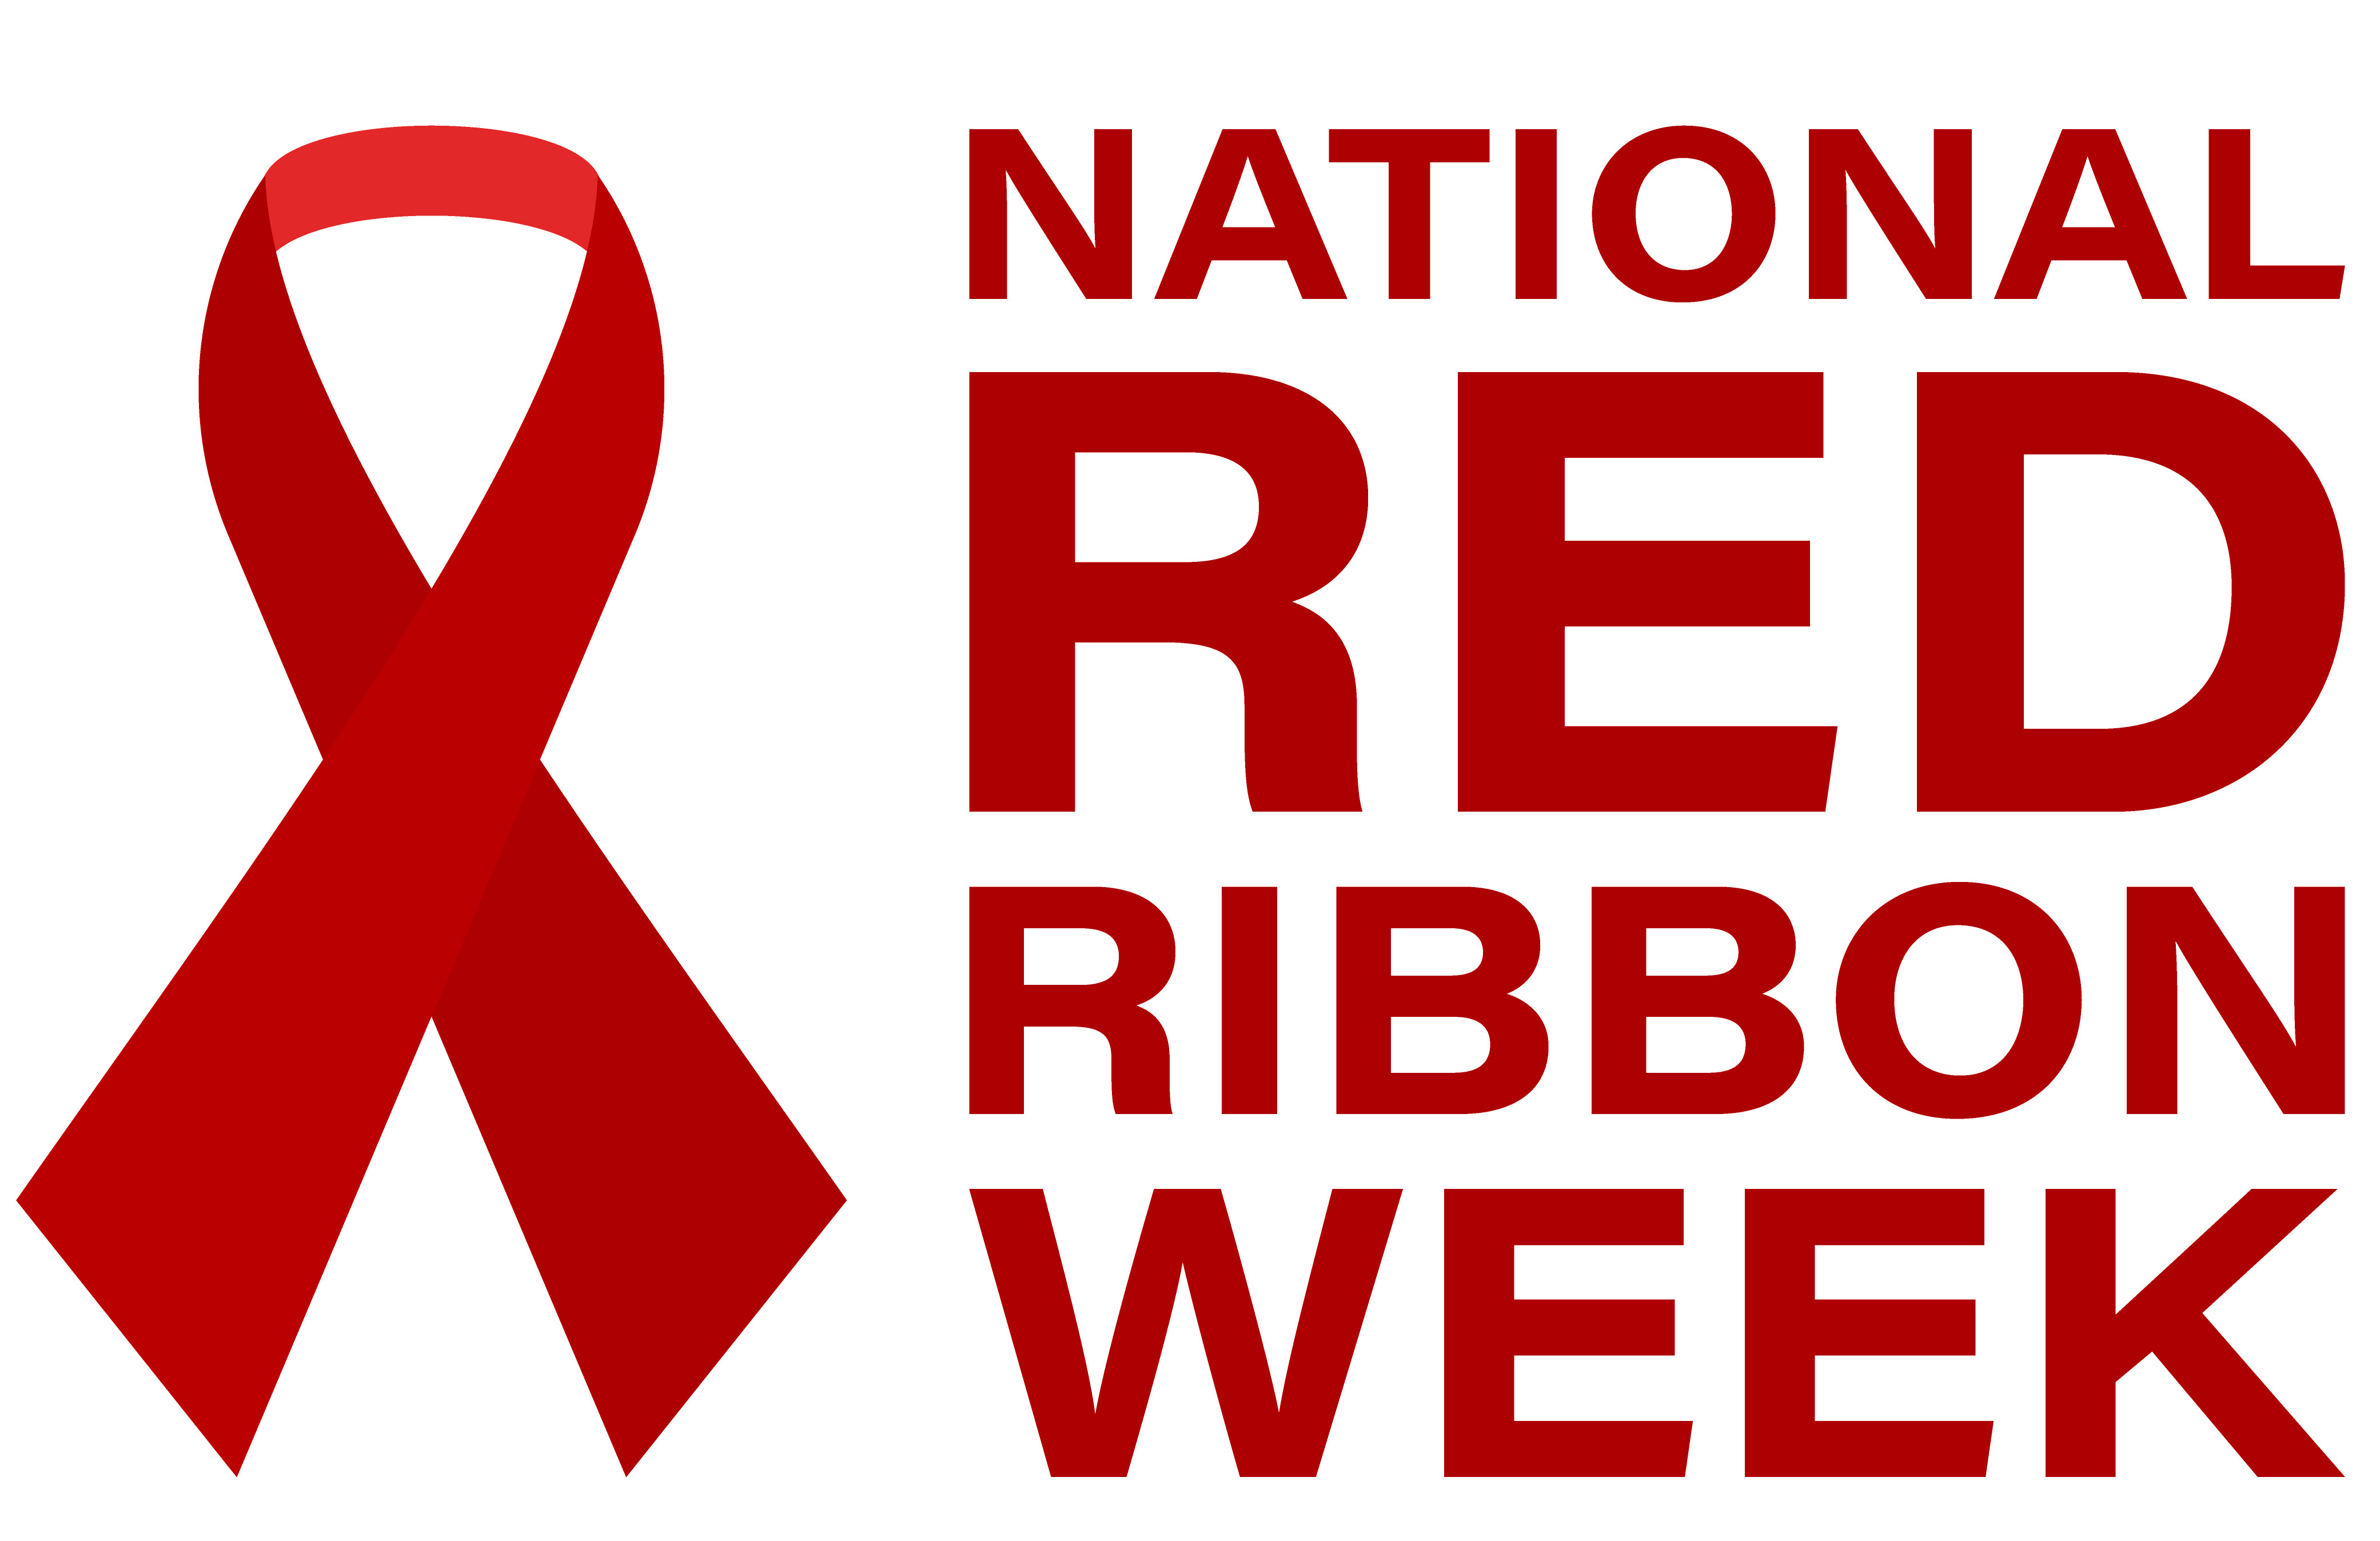 red ribbon week for kids